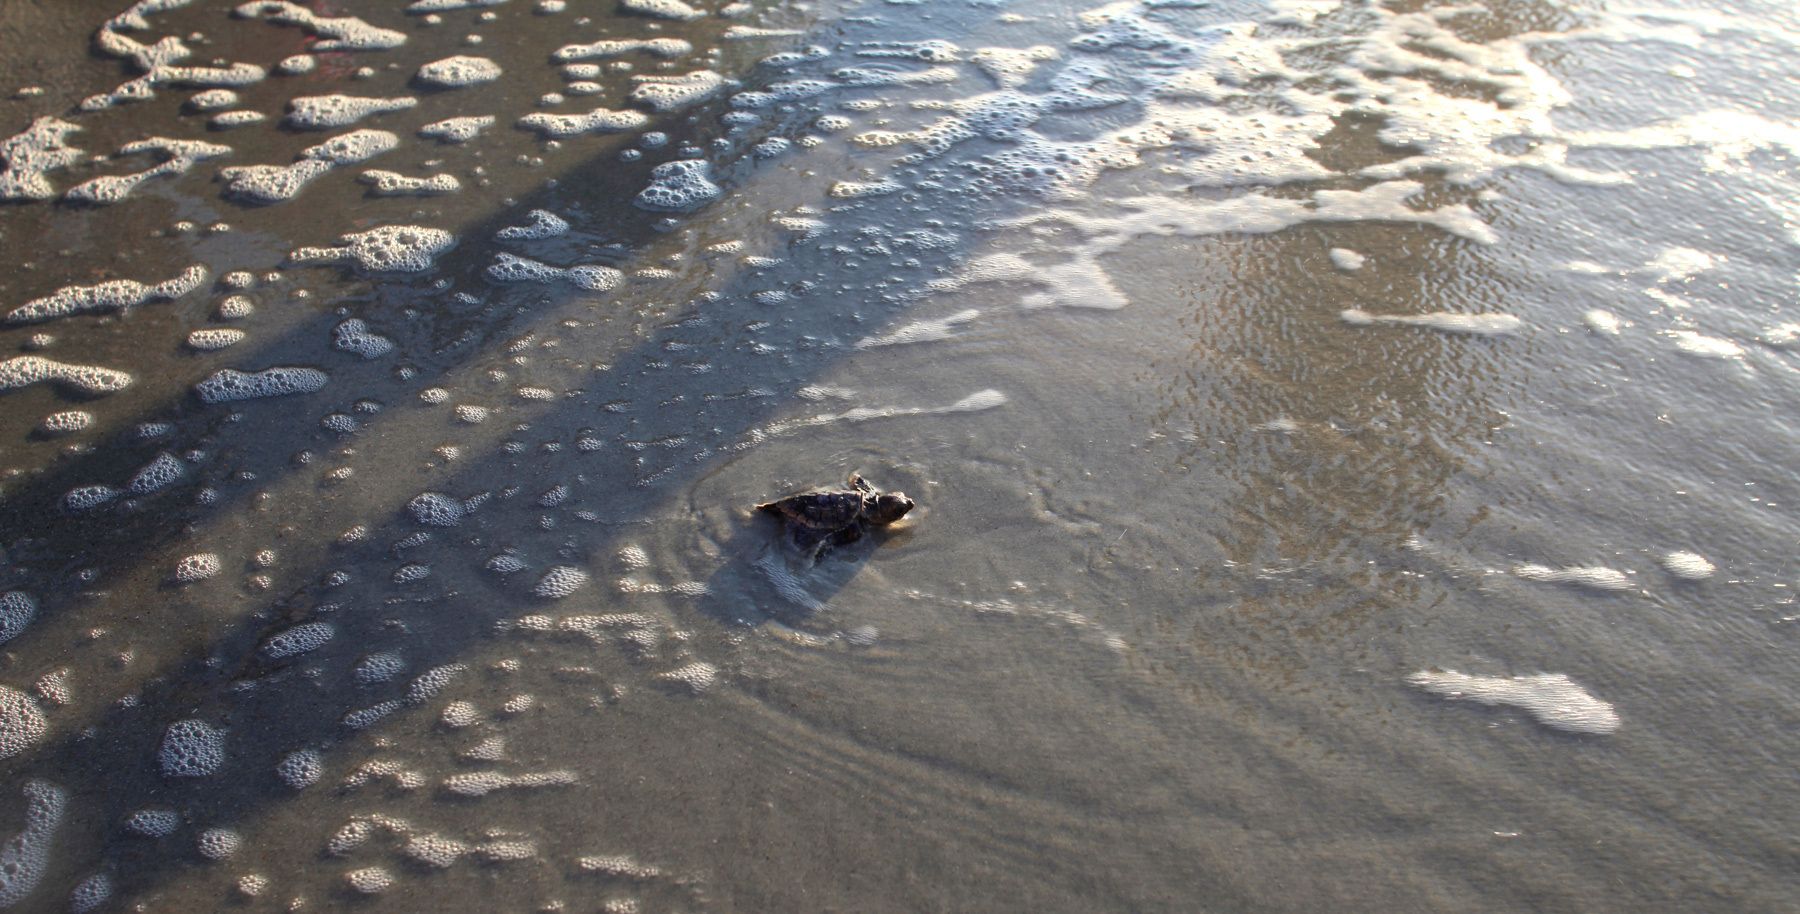 A Loggerhead turtle hatchling makes its way to the surf August 4, 2012 at Myrtle Beach State Park in Myrtle Beach, South Carolina. Nest inventories are taken three days after they hatch and the empty egg shells are categorized and the information is sent to researchers. On this day three live turtles remained in the nest unable to get out on their own. They were released to enthusiastic cheers from those gathered to watch the process. Turtle volunteers walk the area's beaches along South Carolina's coast daily during the nesting season, looking for signs of turtle activity and keeping tabs on the progress of the endangered species of turtles that lay their eggs along the coast.   REUTERS/Randall Hill  (UNITED STATES)